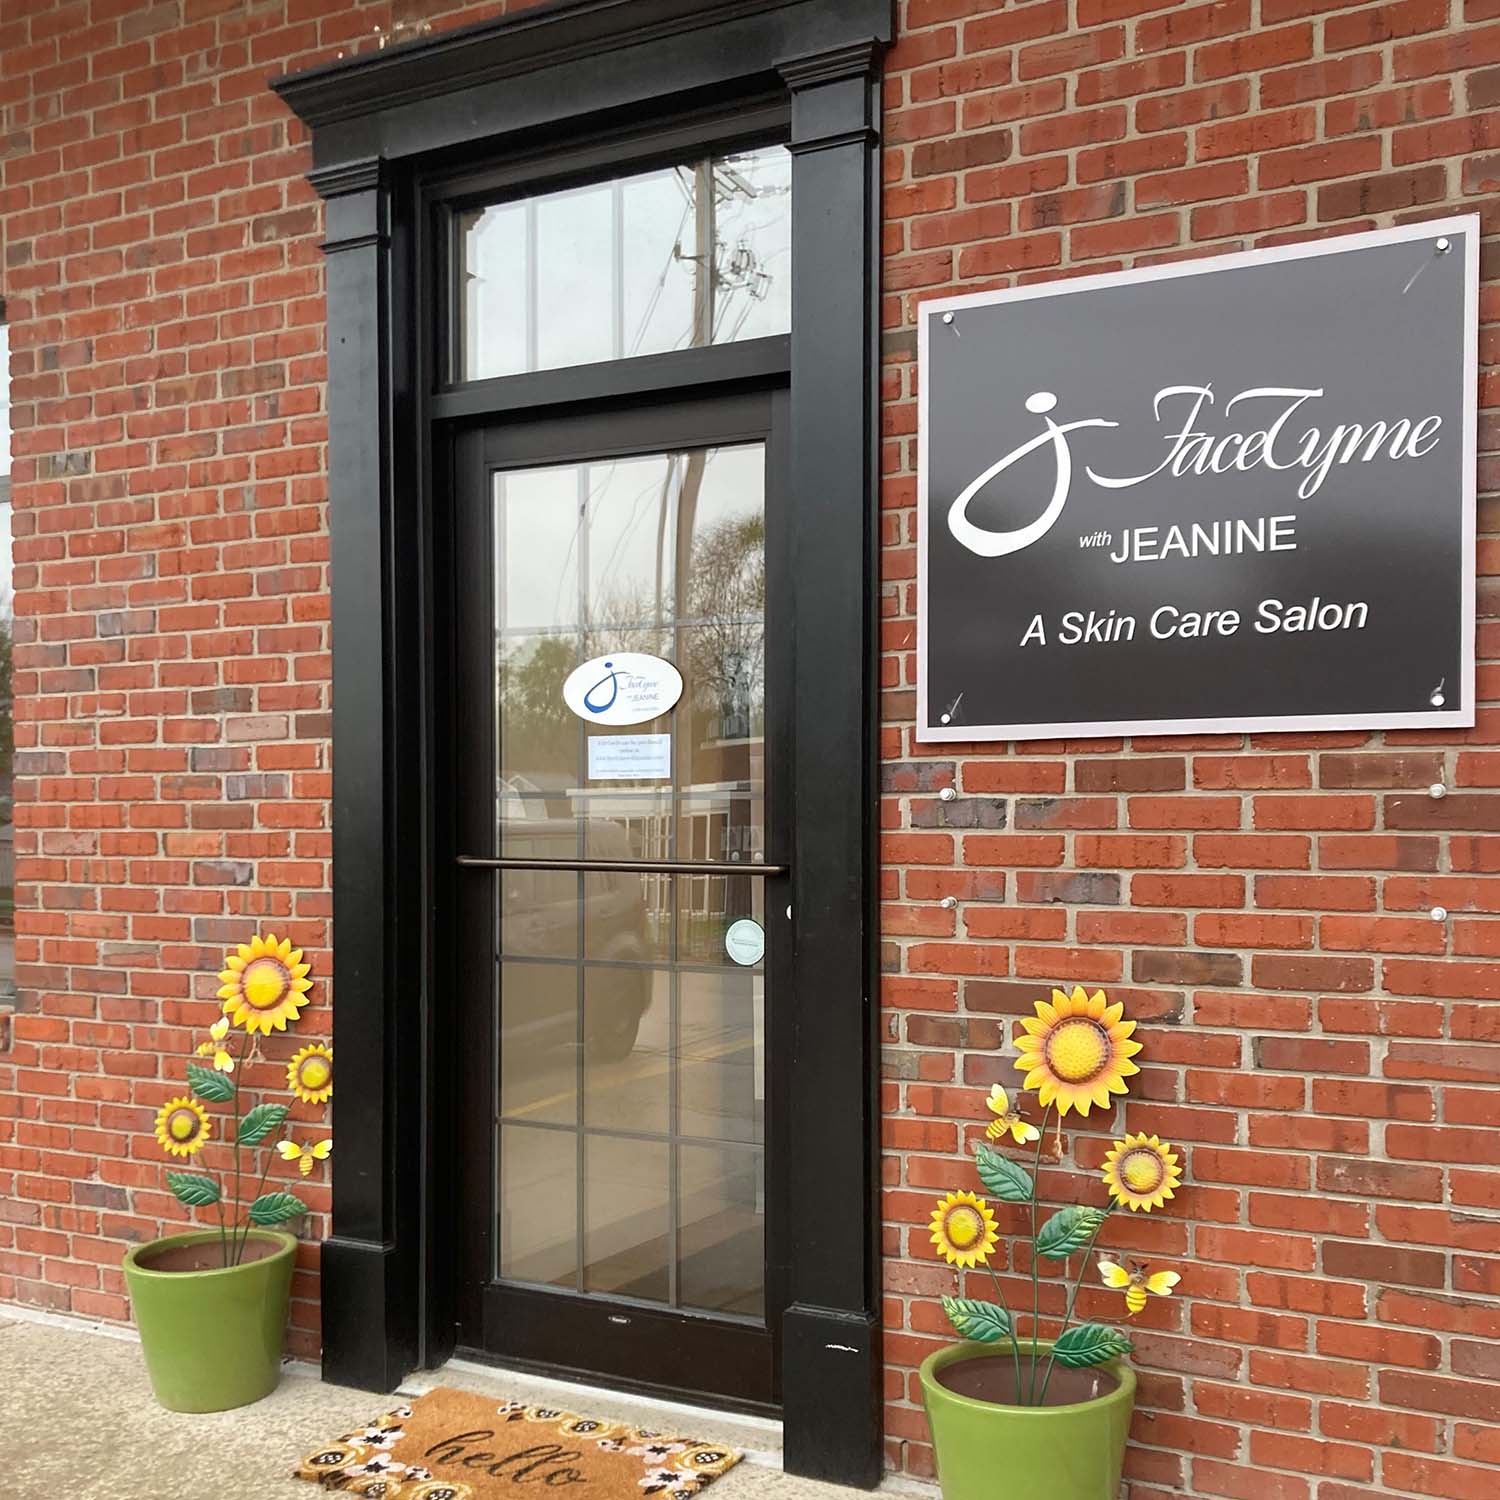 An entrance to FaceTyme with Jeanine, A Skin Care Salon, featuring a brick wall, a black-framed glass door, and a sign with the salon's name.